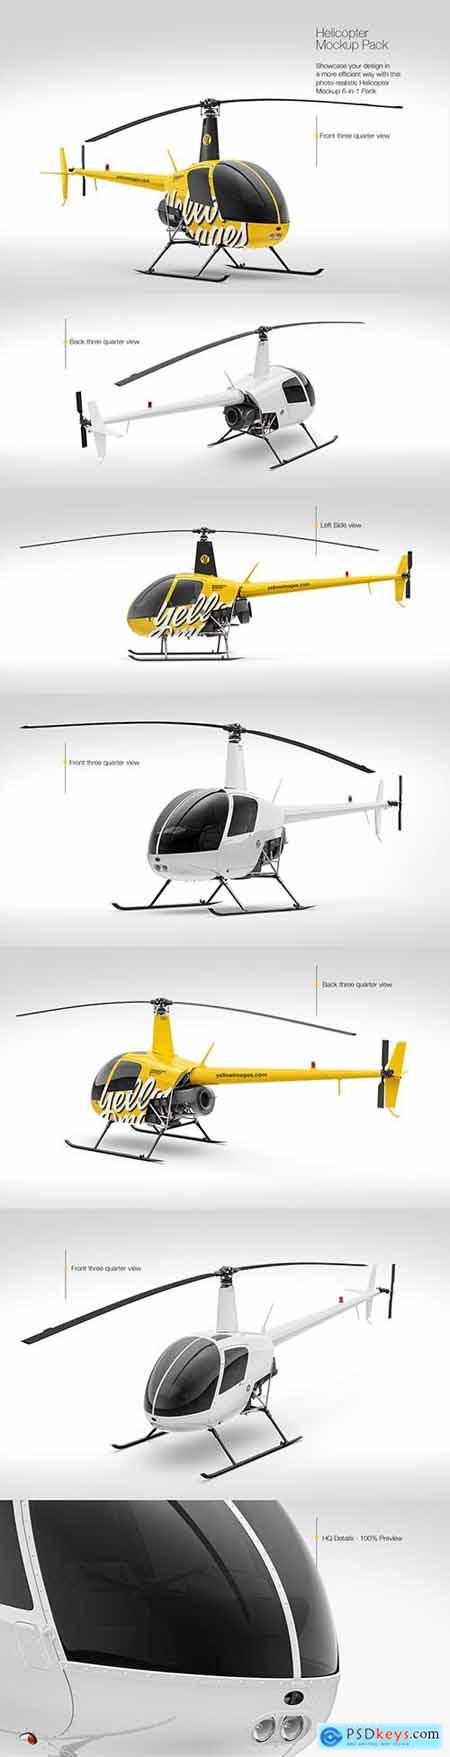 Download Helicopter Mockup Pack 84484 Free Download Photoshop Vector Stock Image Via Torrent Zippyshare From Psdkeys Com